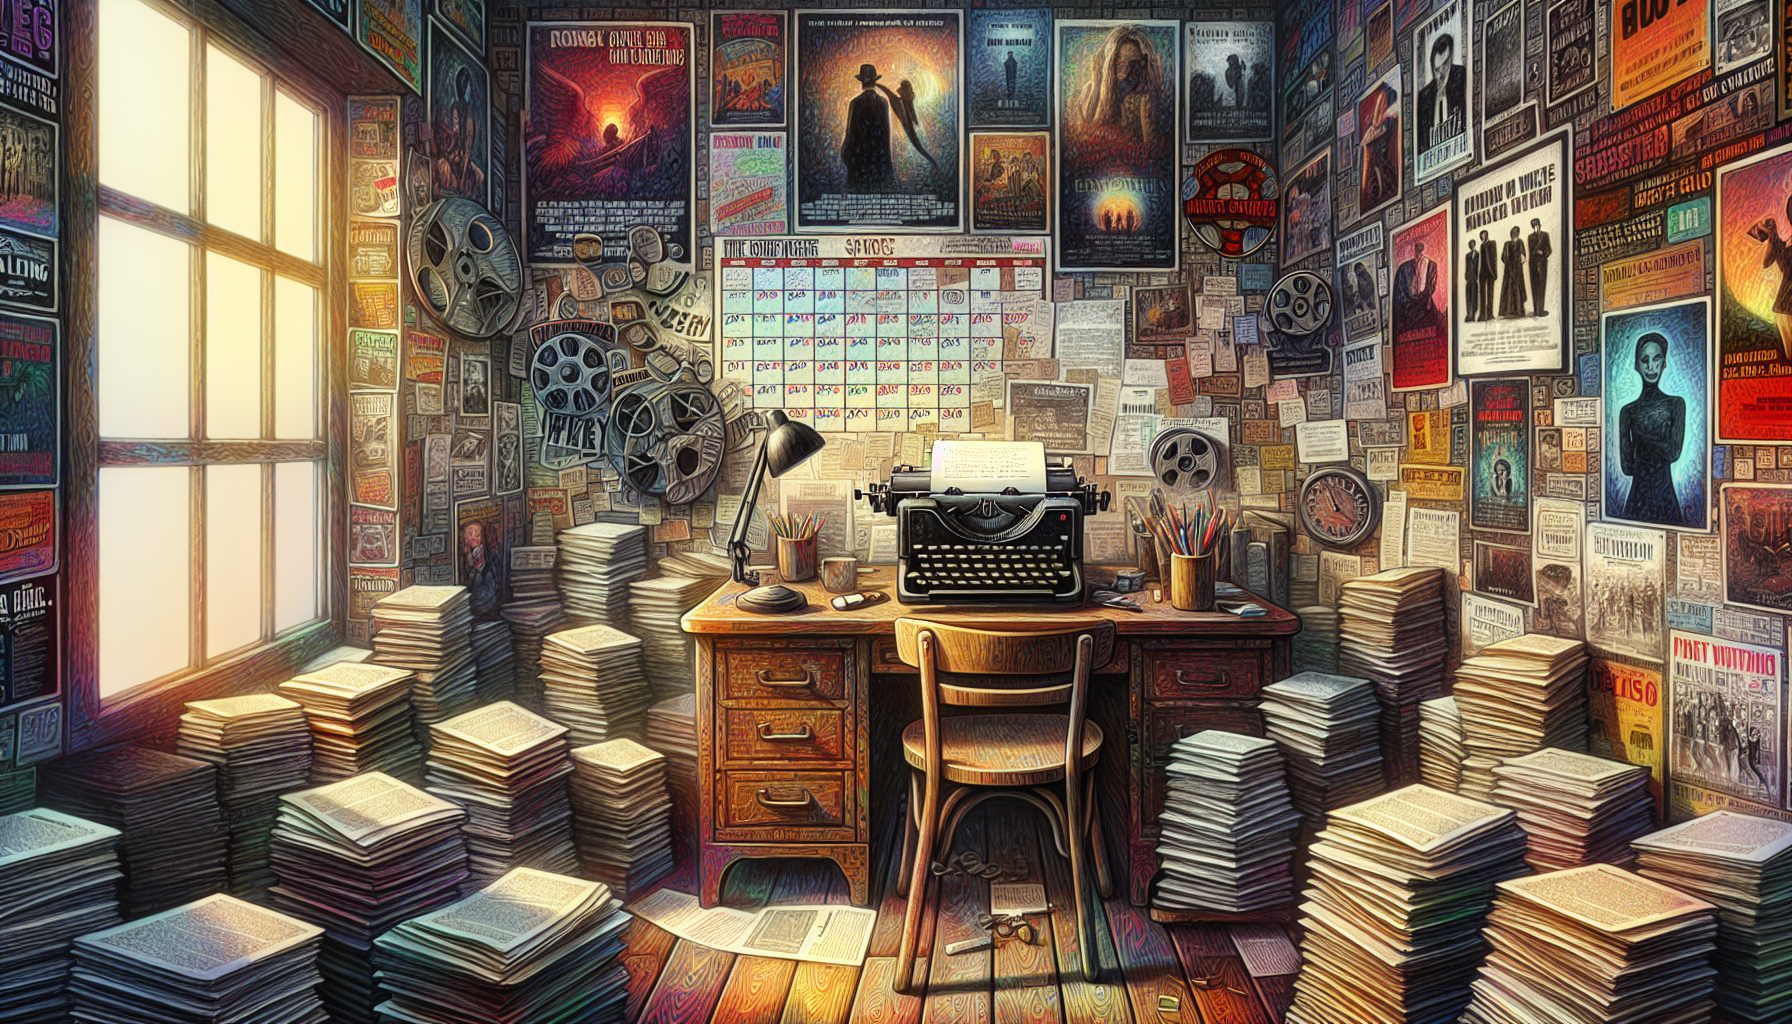 An artistically cluttered desk with a typewriter, stacks of screenplay scripts, movie posters on the wall, and a calendar marked with various contest deadlines, all in a cozy, dimly lit writer's room.